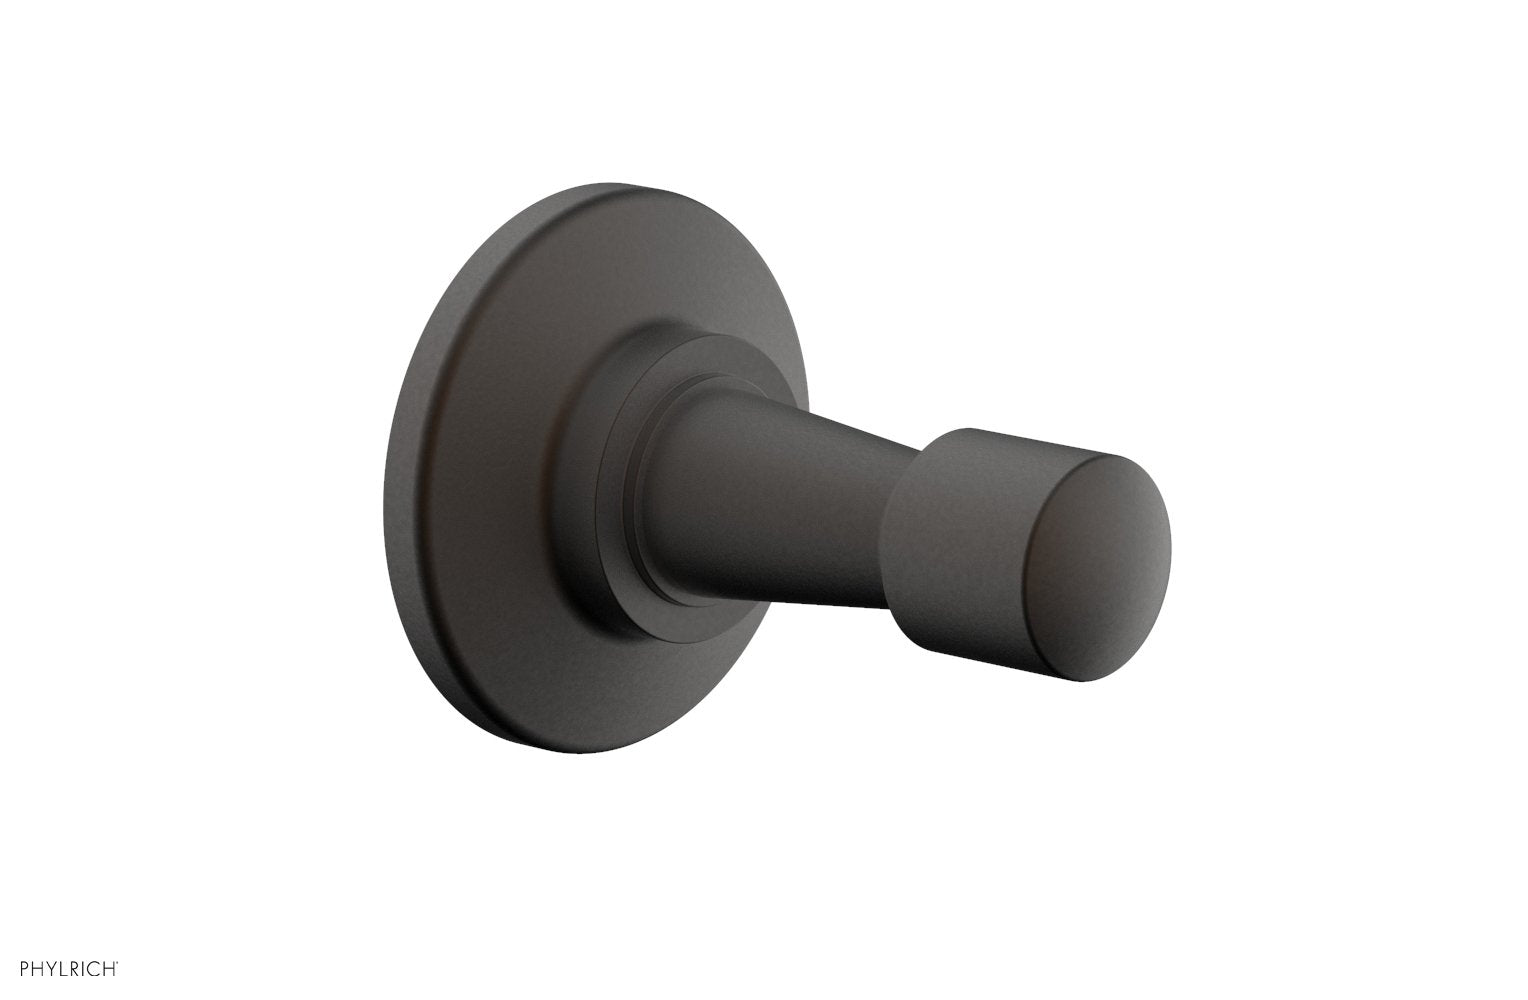 Phylrich WORKS Robe Hook